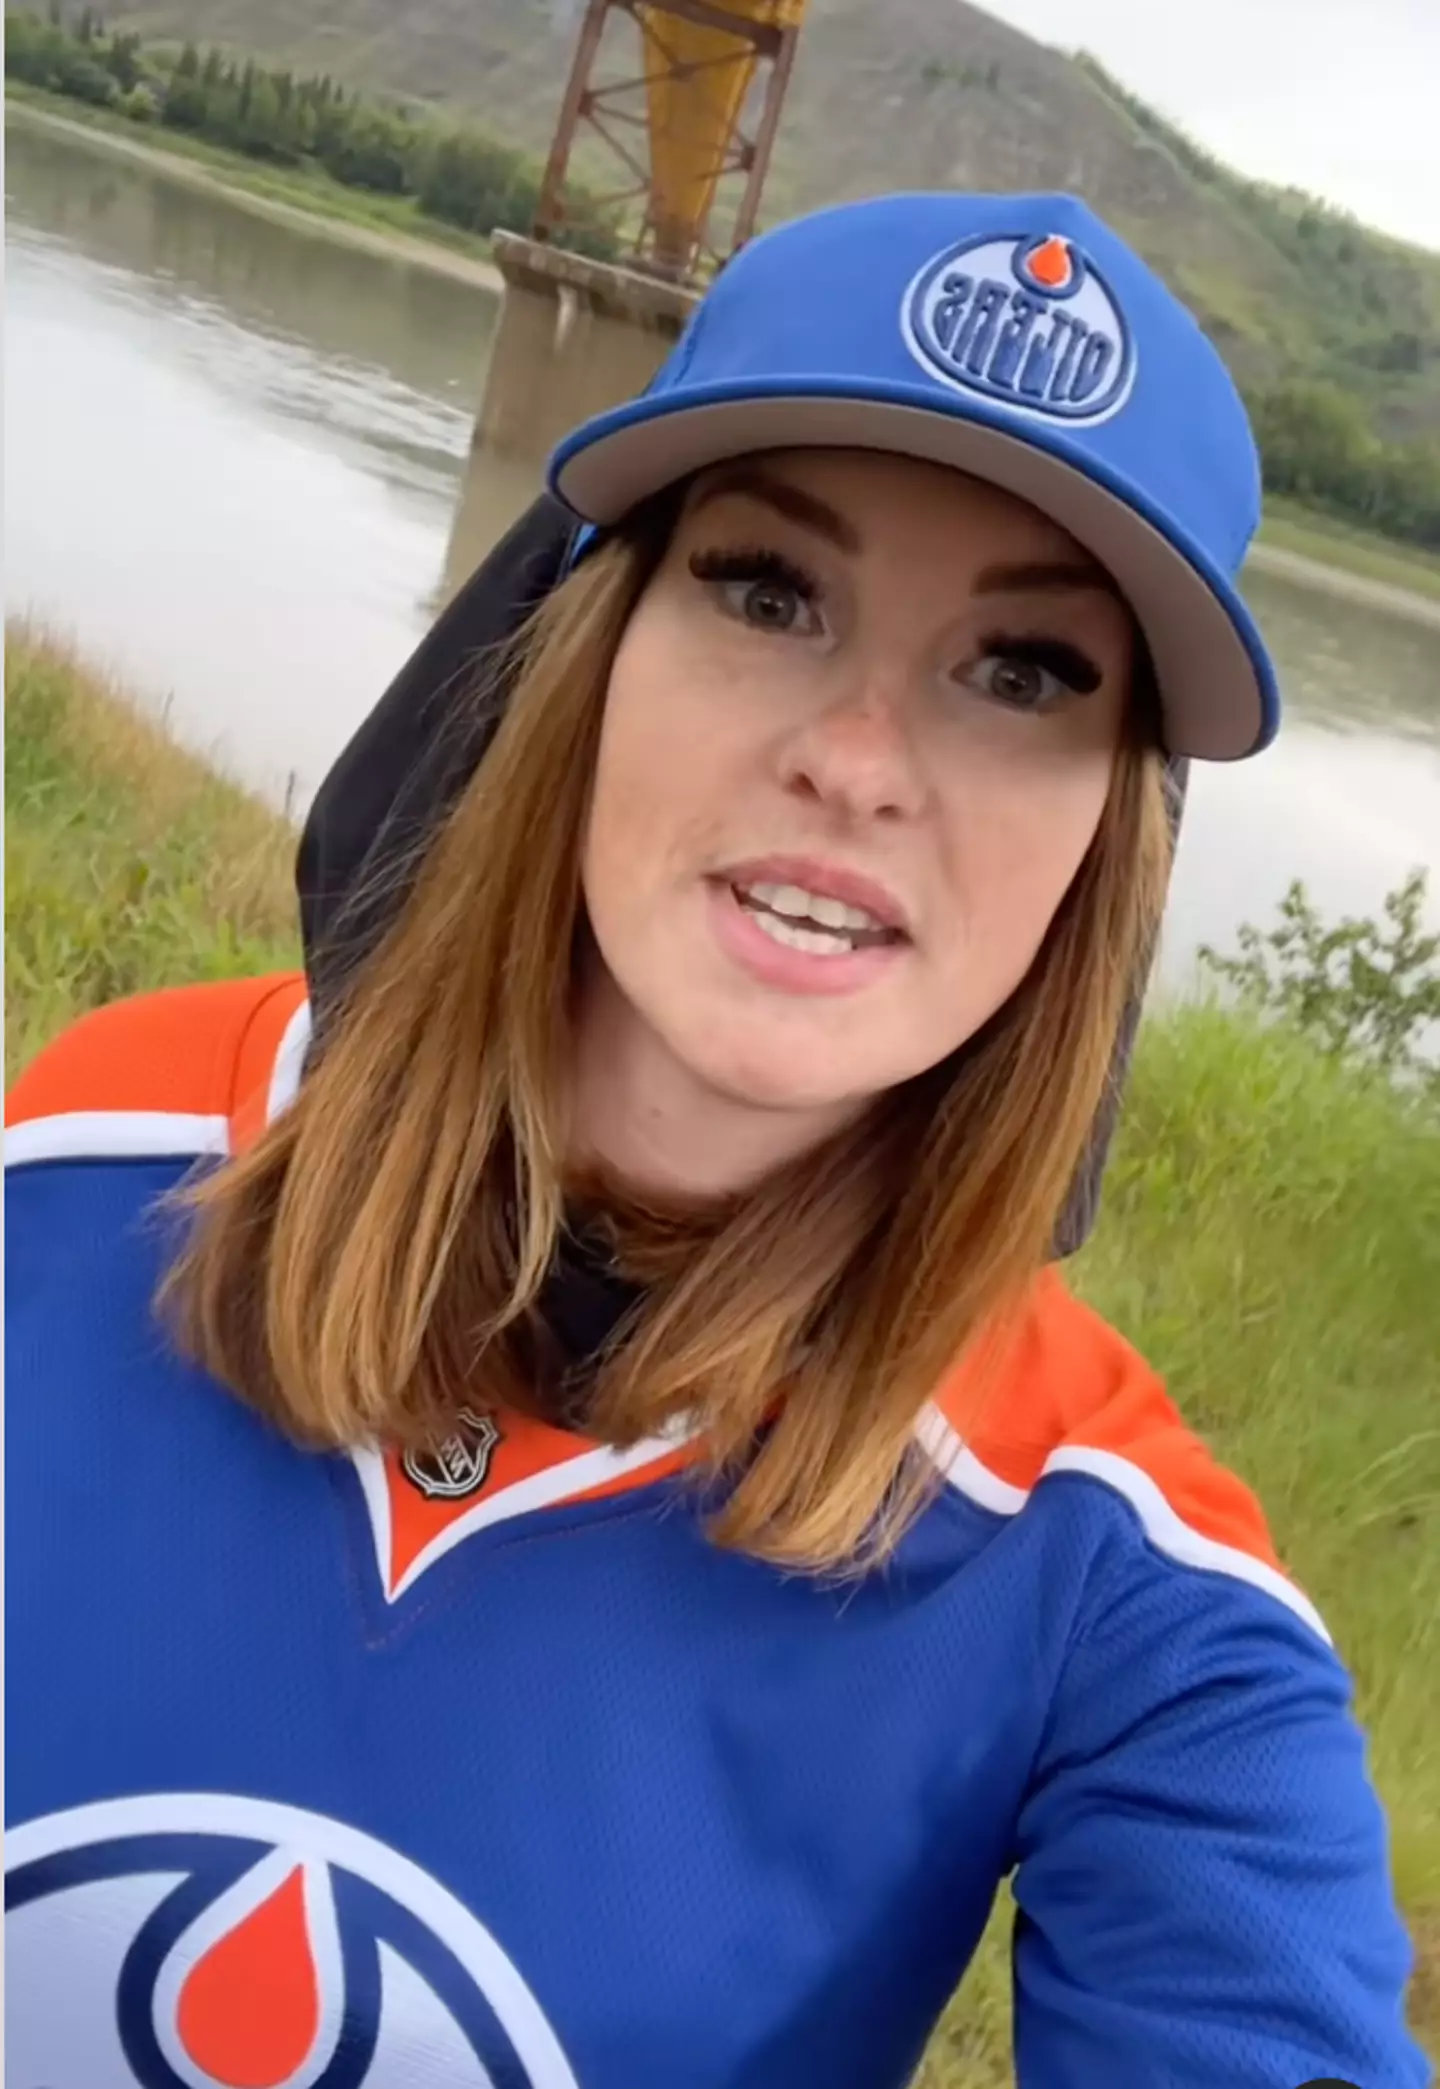 The Oilers fan has since hit out at her critics. (@k89.fly/Instagram)